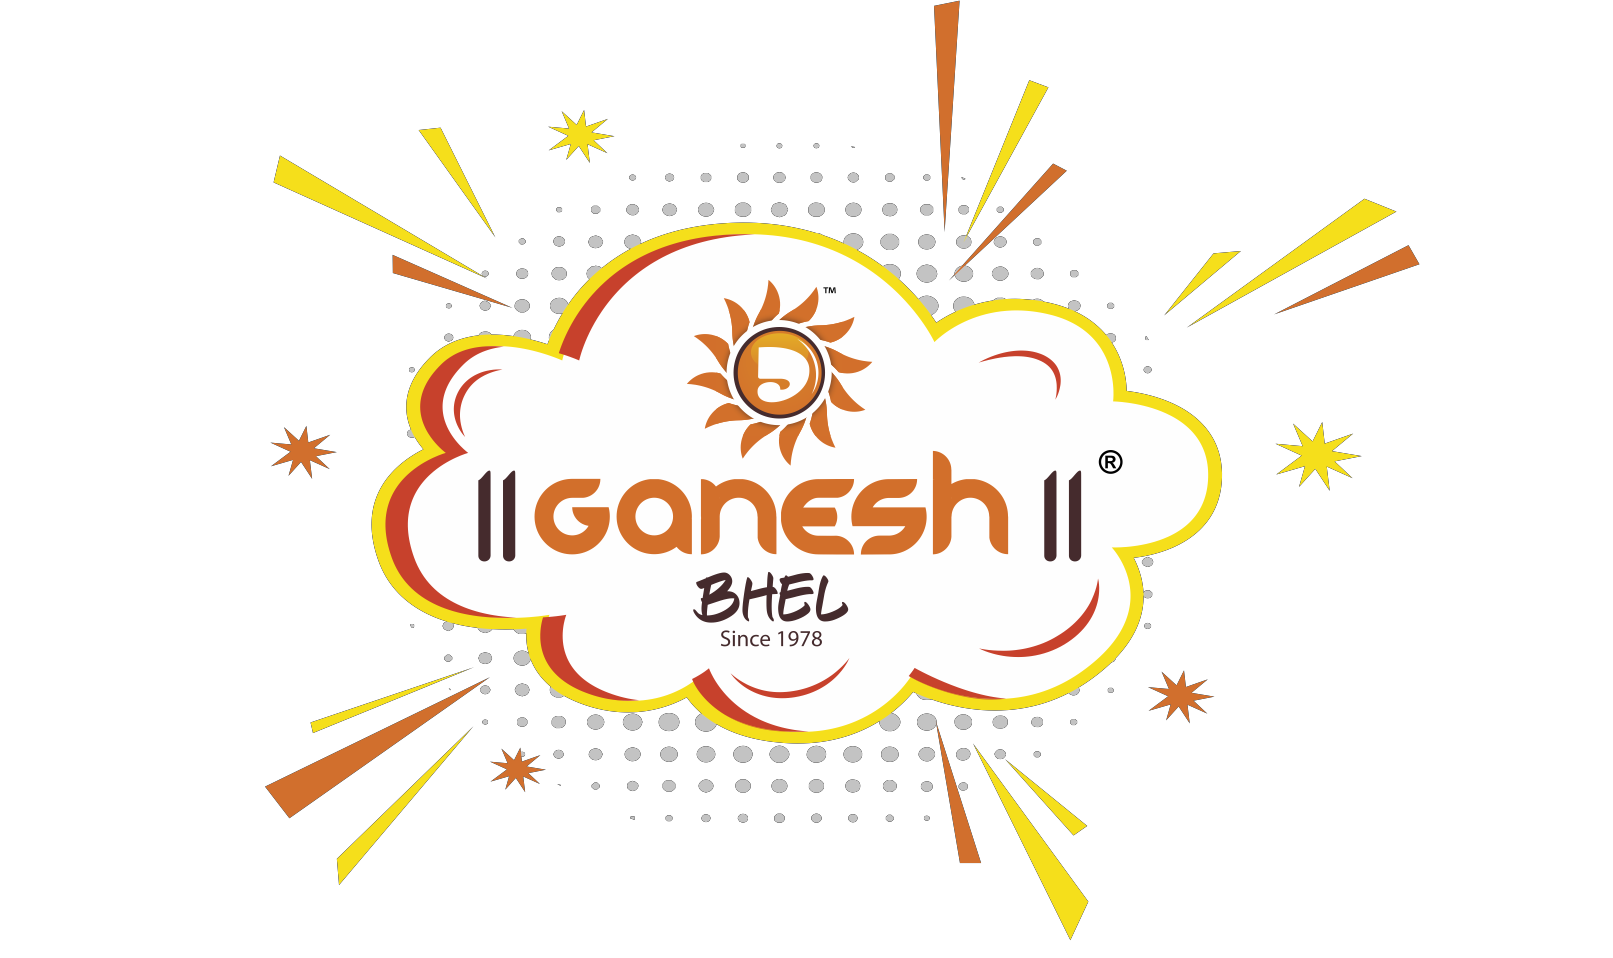 Ganesh Bhel And Chaat Product-Manufacturer Of Bhel Namkeen & Chaat | Fusion Chaat | Healthy Chaat |Best Fast Food Restaurants In Pune